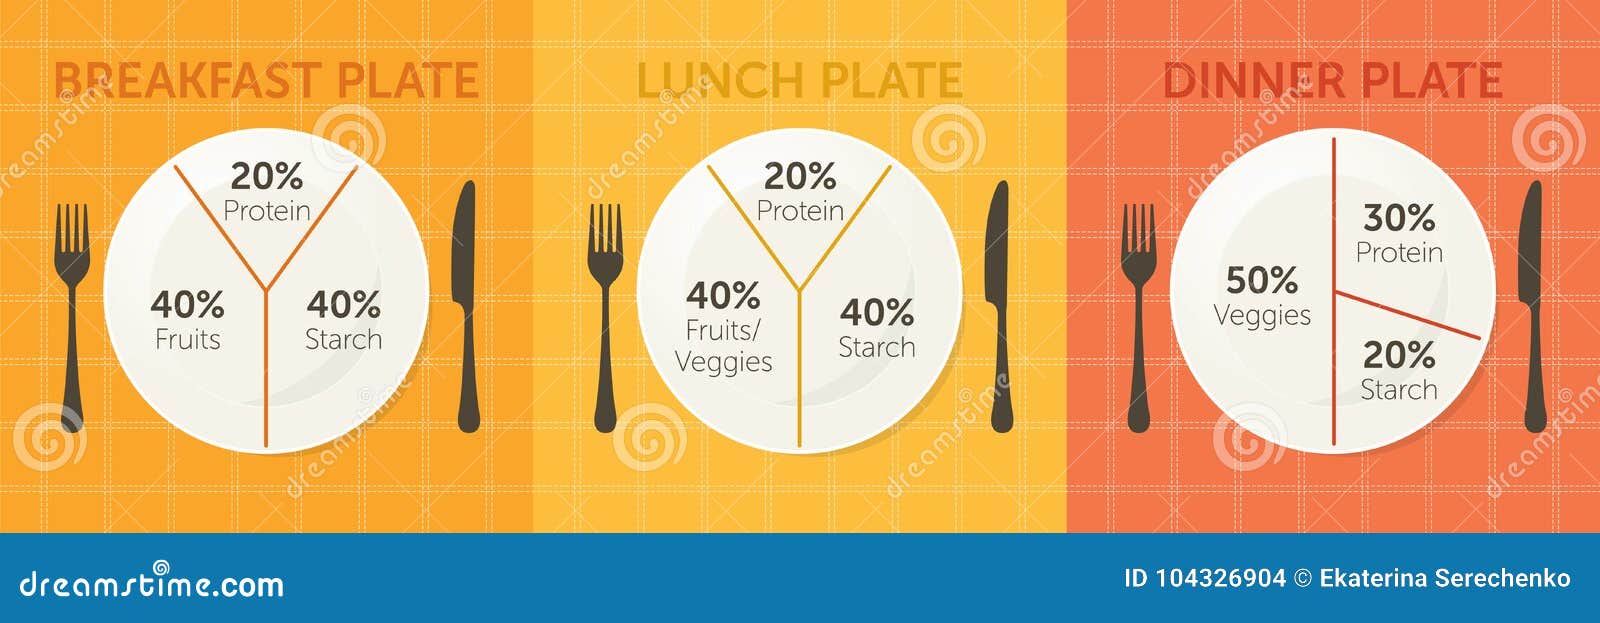 Healthy Eating Plate Diagram Stock Vector - Illustration of knife